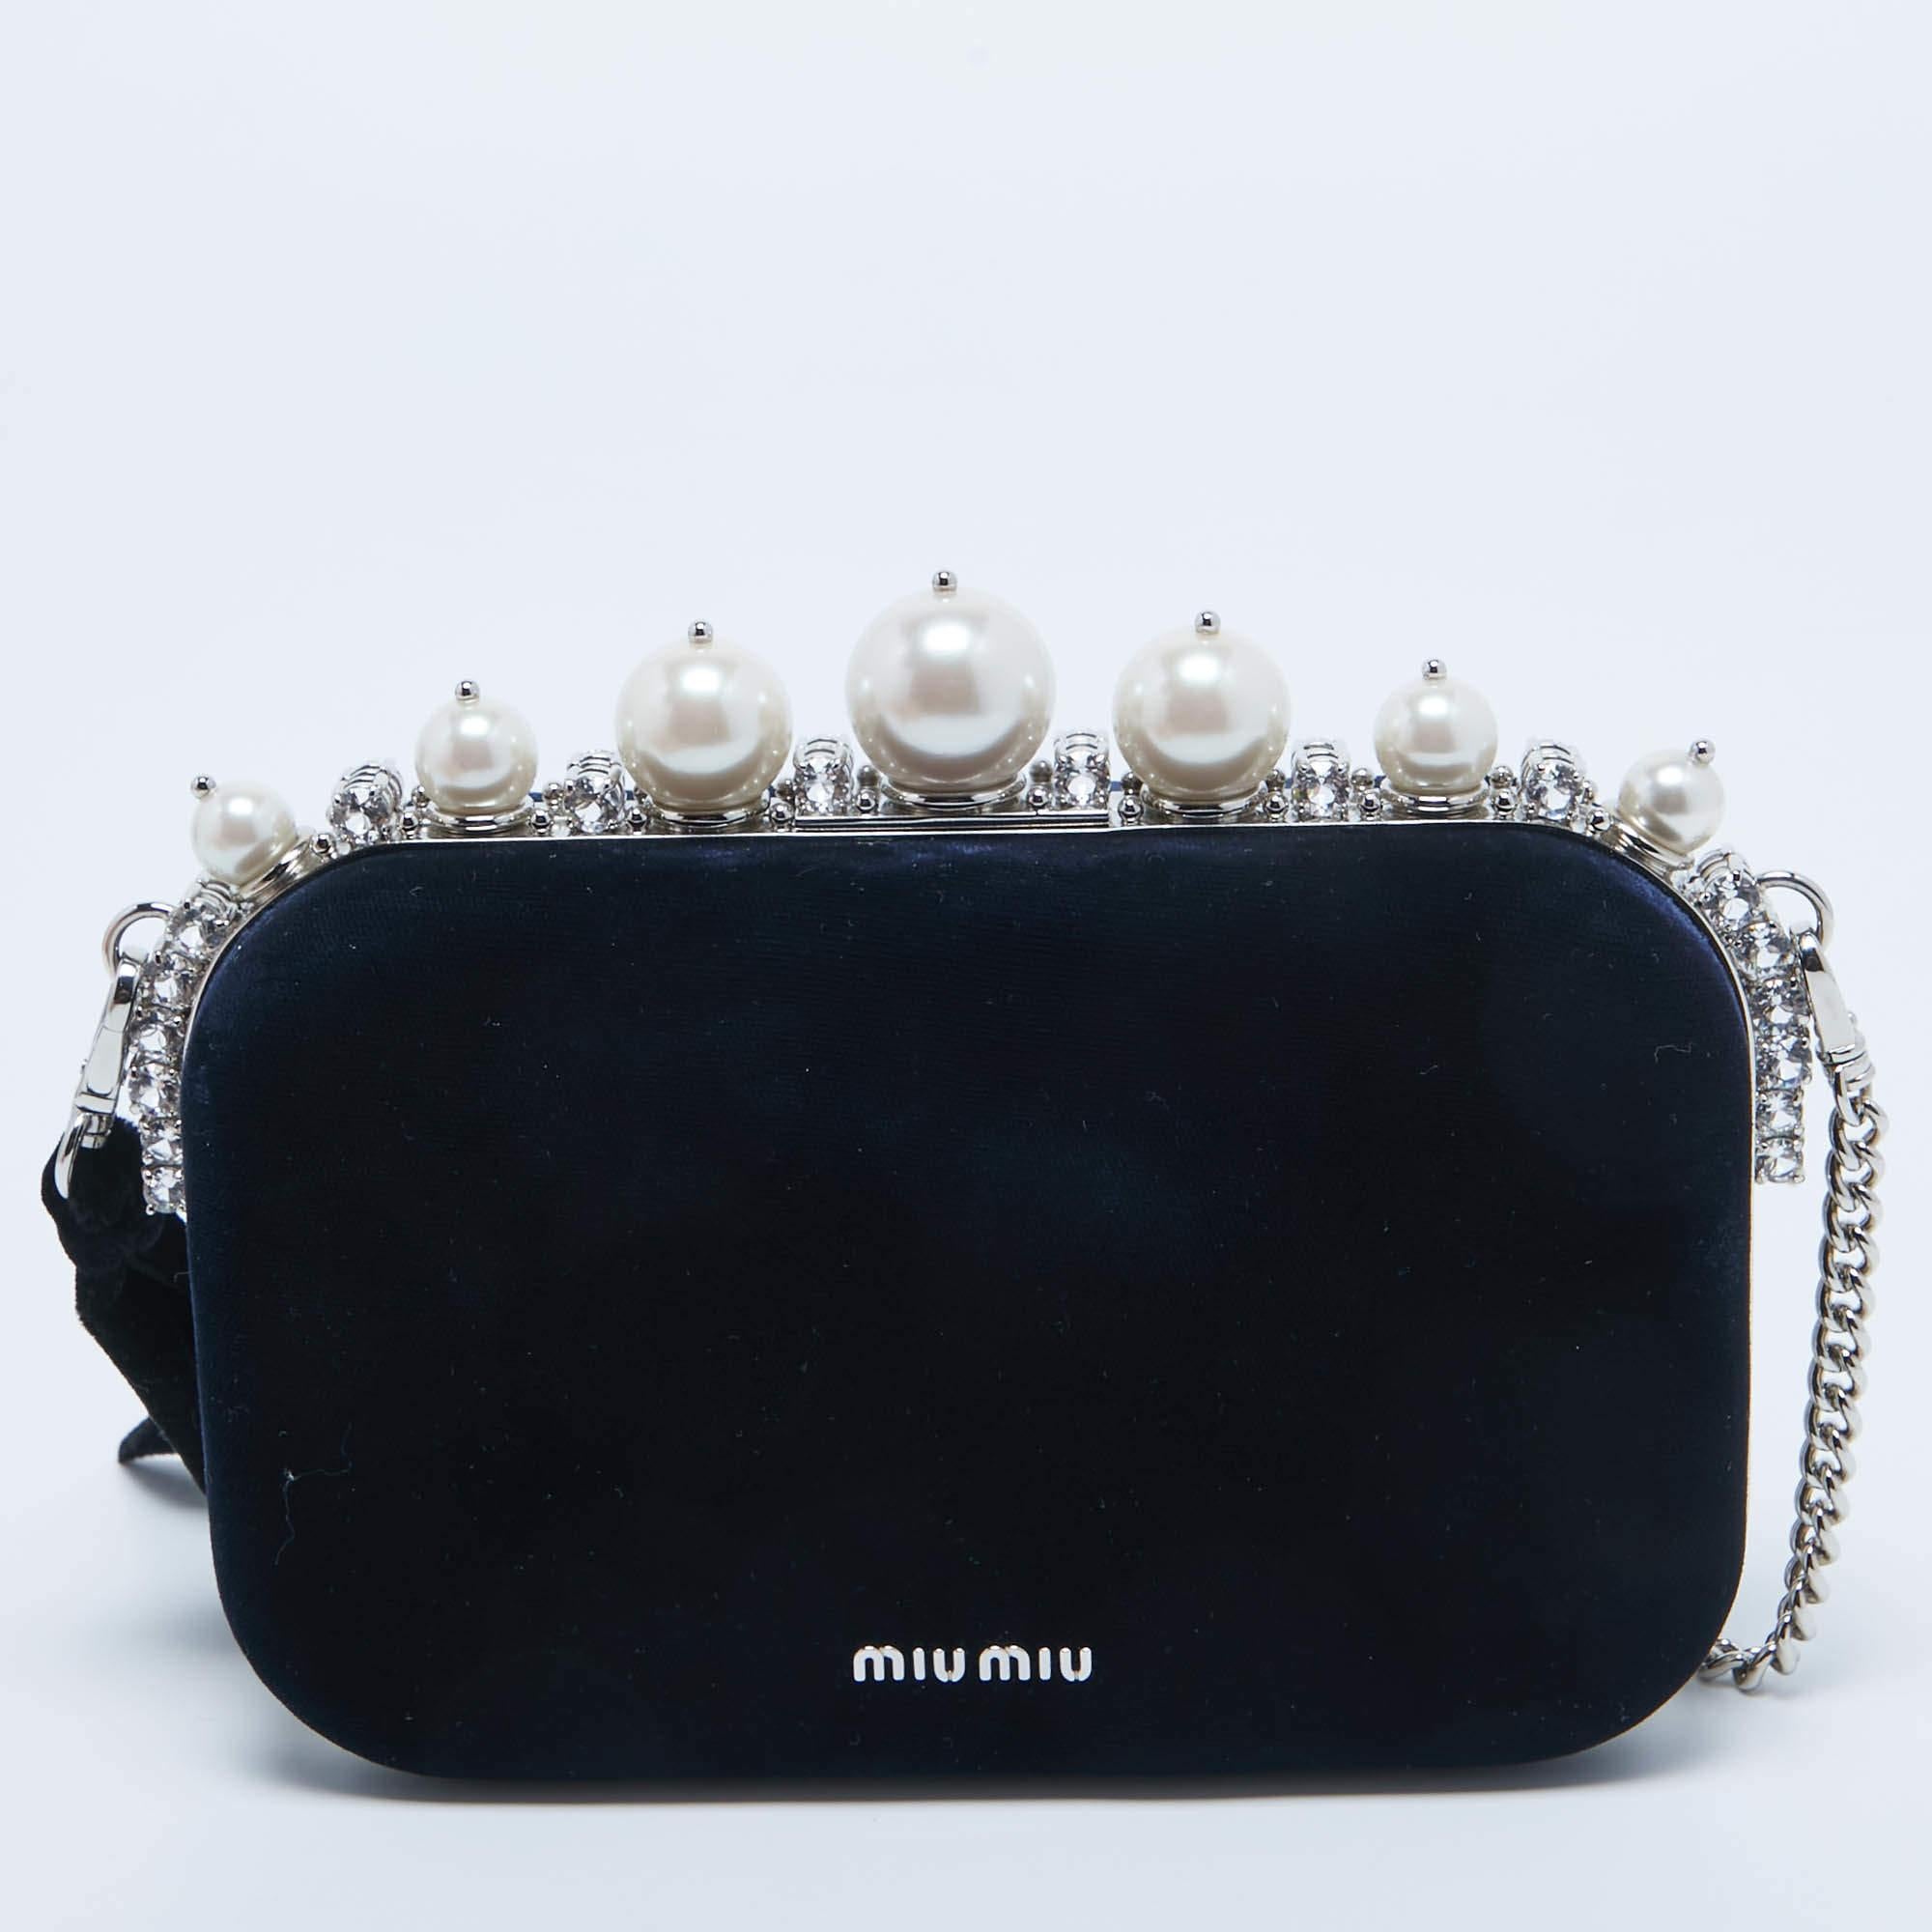 The Miu Miu cutch exudes opulence with its plush navy velvet exterior adorned with exquisite pearls and crystals. The boxy silhouette is complemented by a delicate chain, creating a luxurious and sophisticated accessory for formal